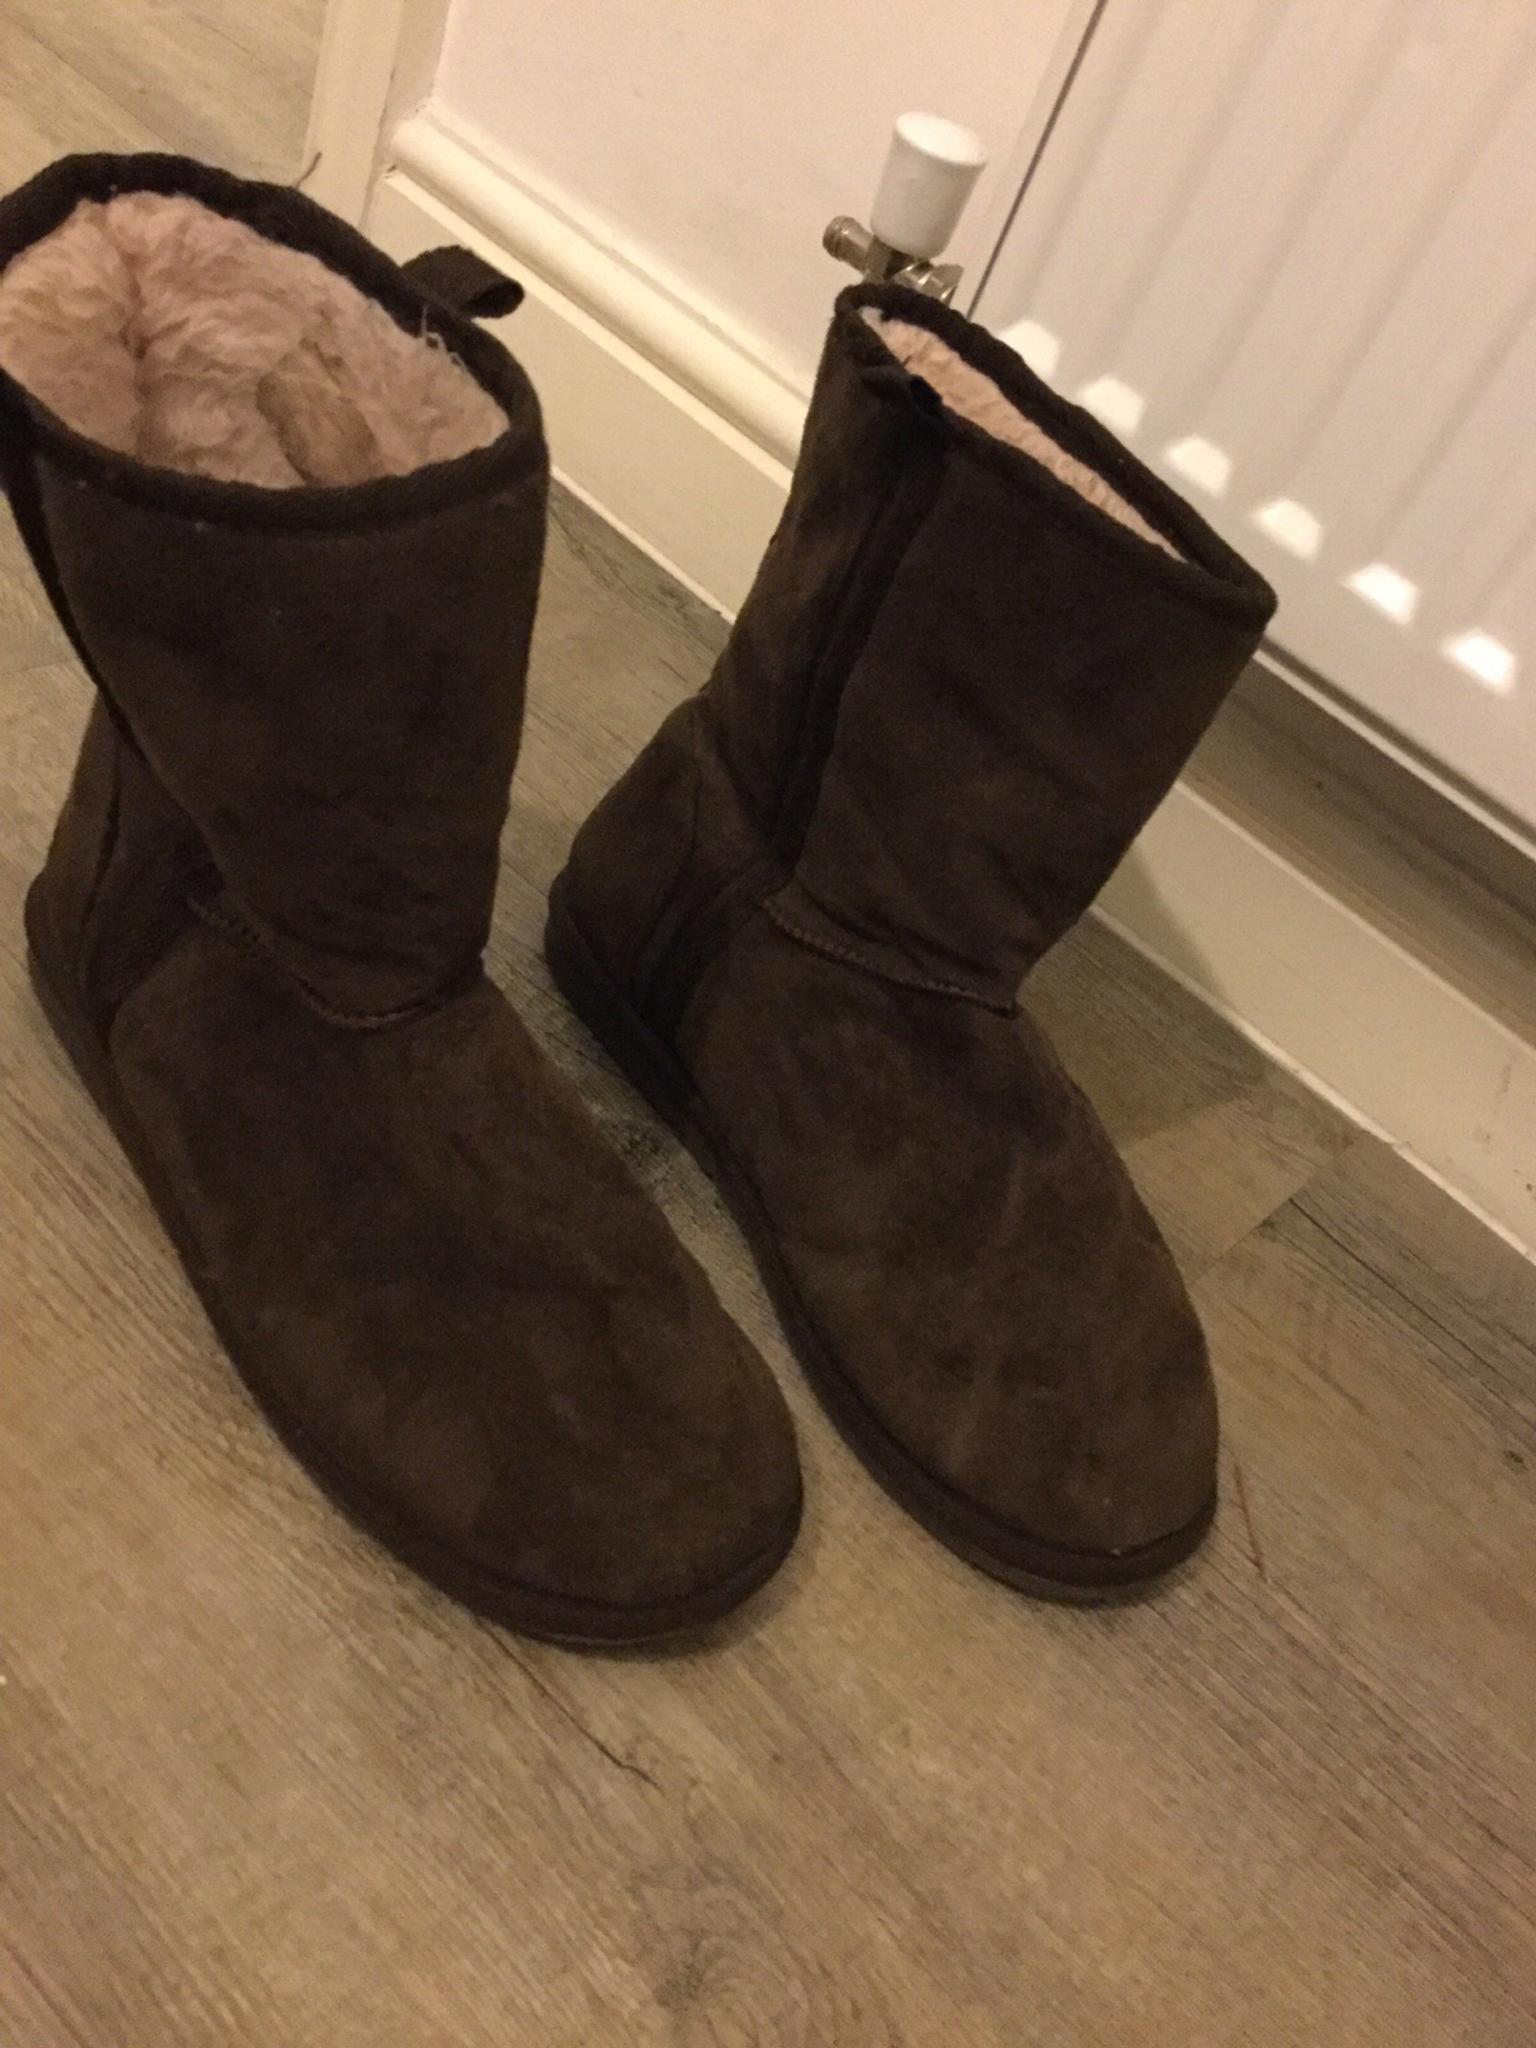 uggs in london